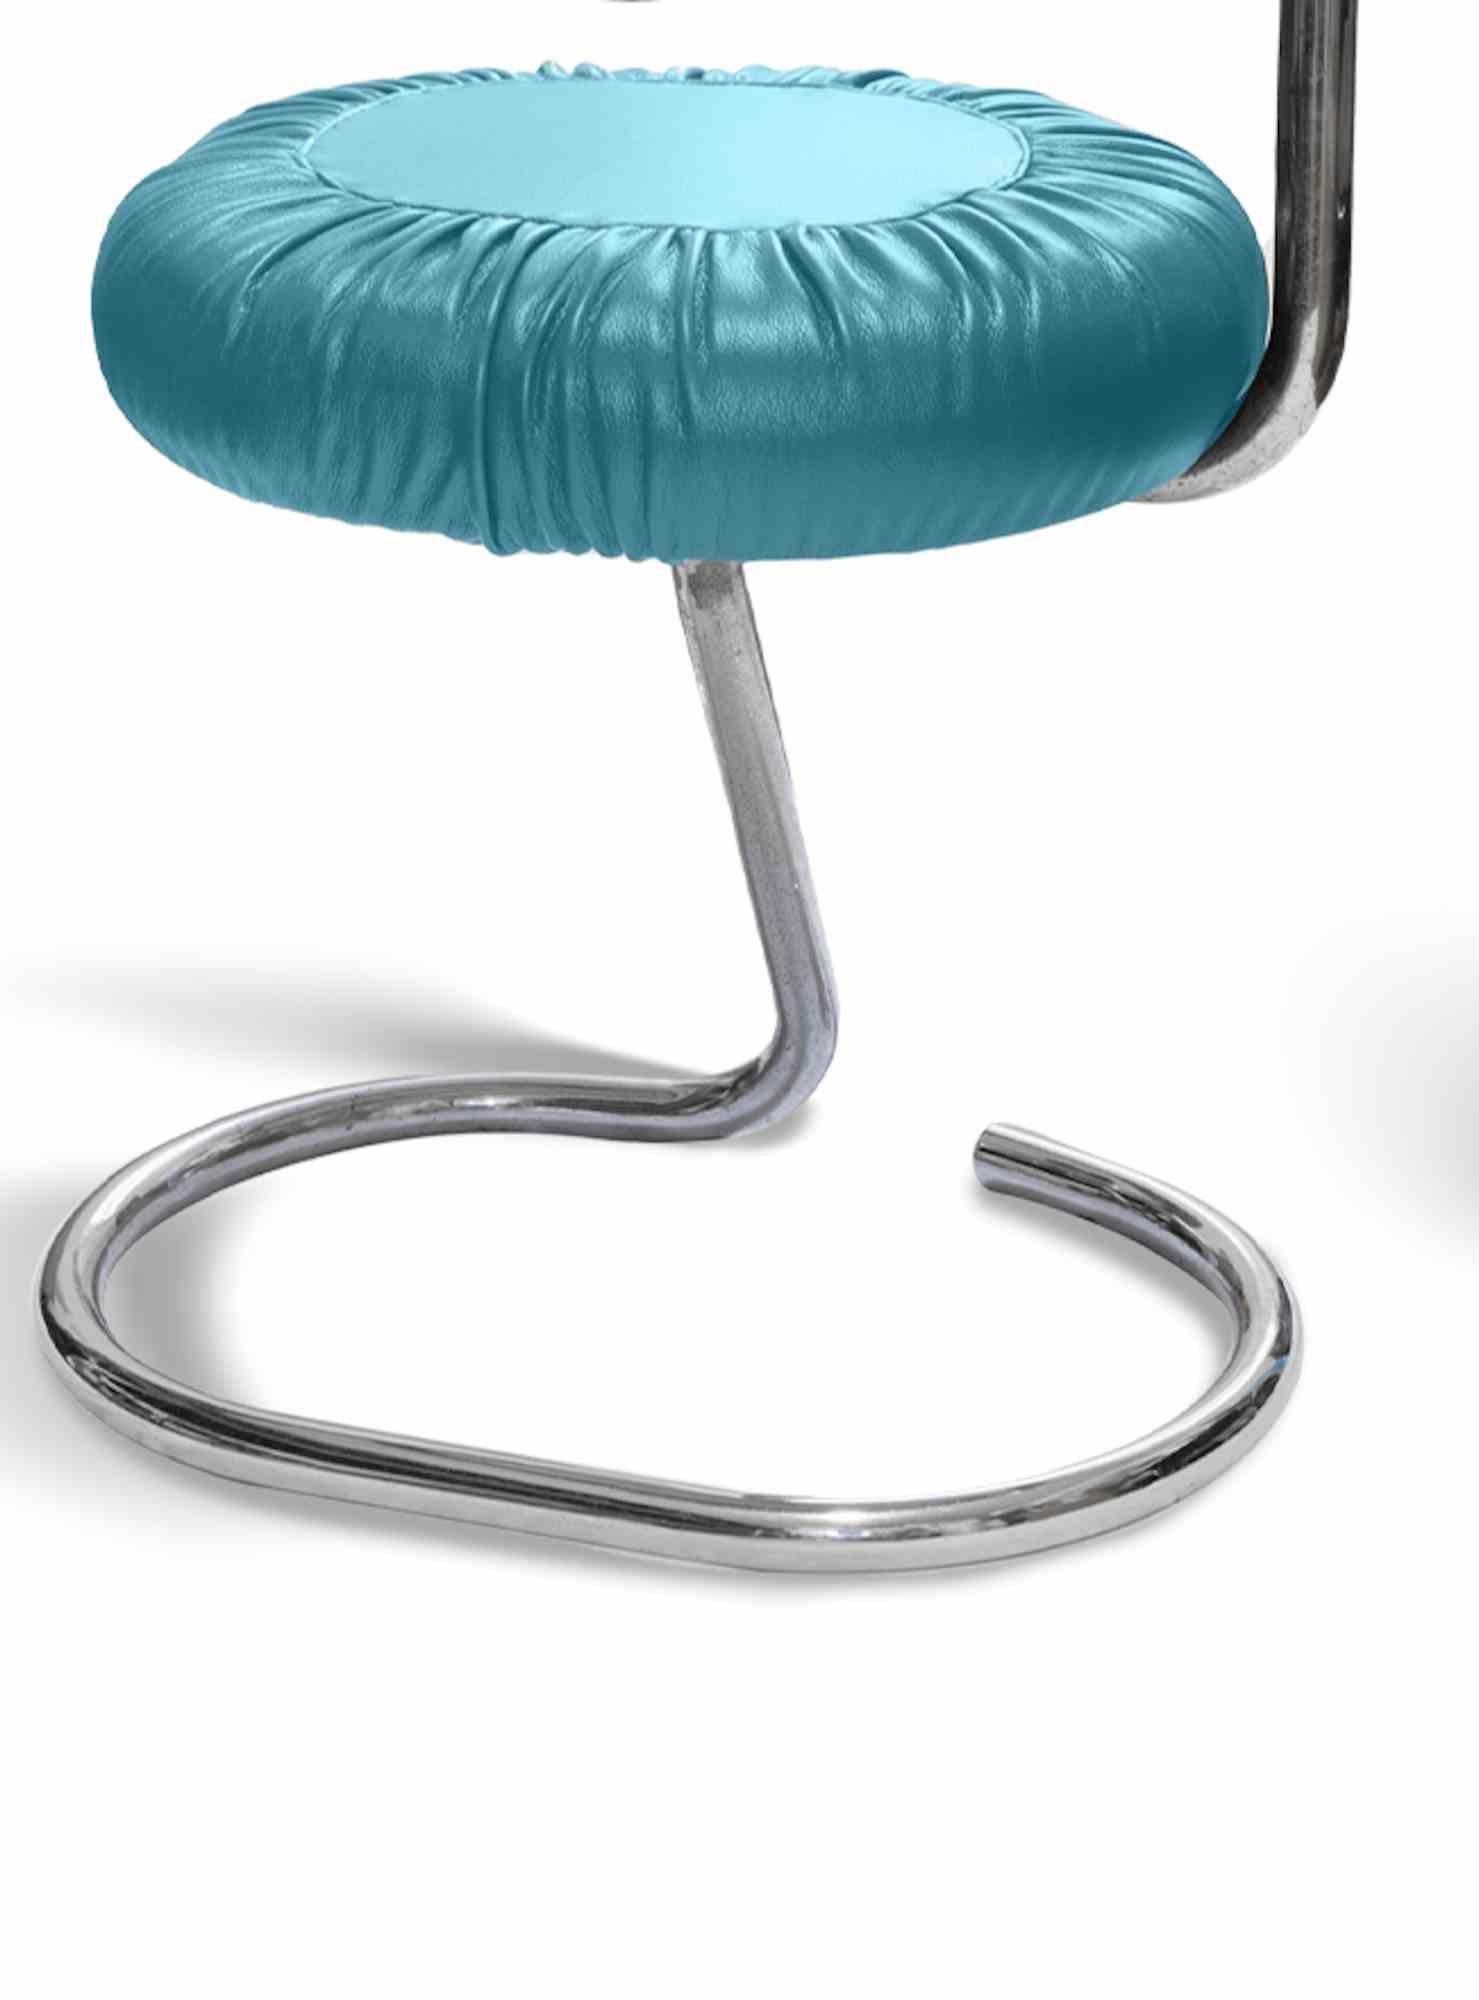 Set of 8 Light Blue Cobra Chairs is a set of chairs realized in the 1970s by Giotto Stoppino (Milan, 1926).

Chromed tubular steel structure and light blue fabric.

This 'Cobra' chair was designed by Giotto Stoppino during the 1970s and produced in